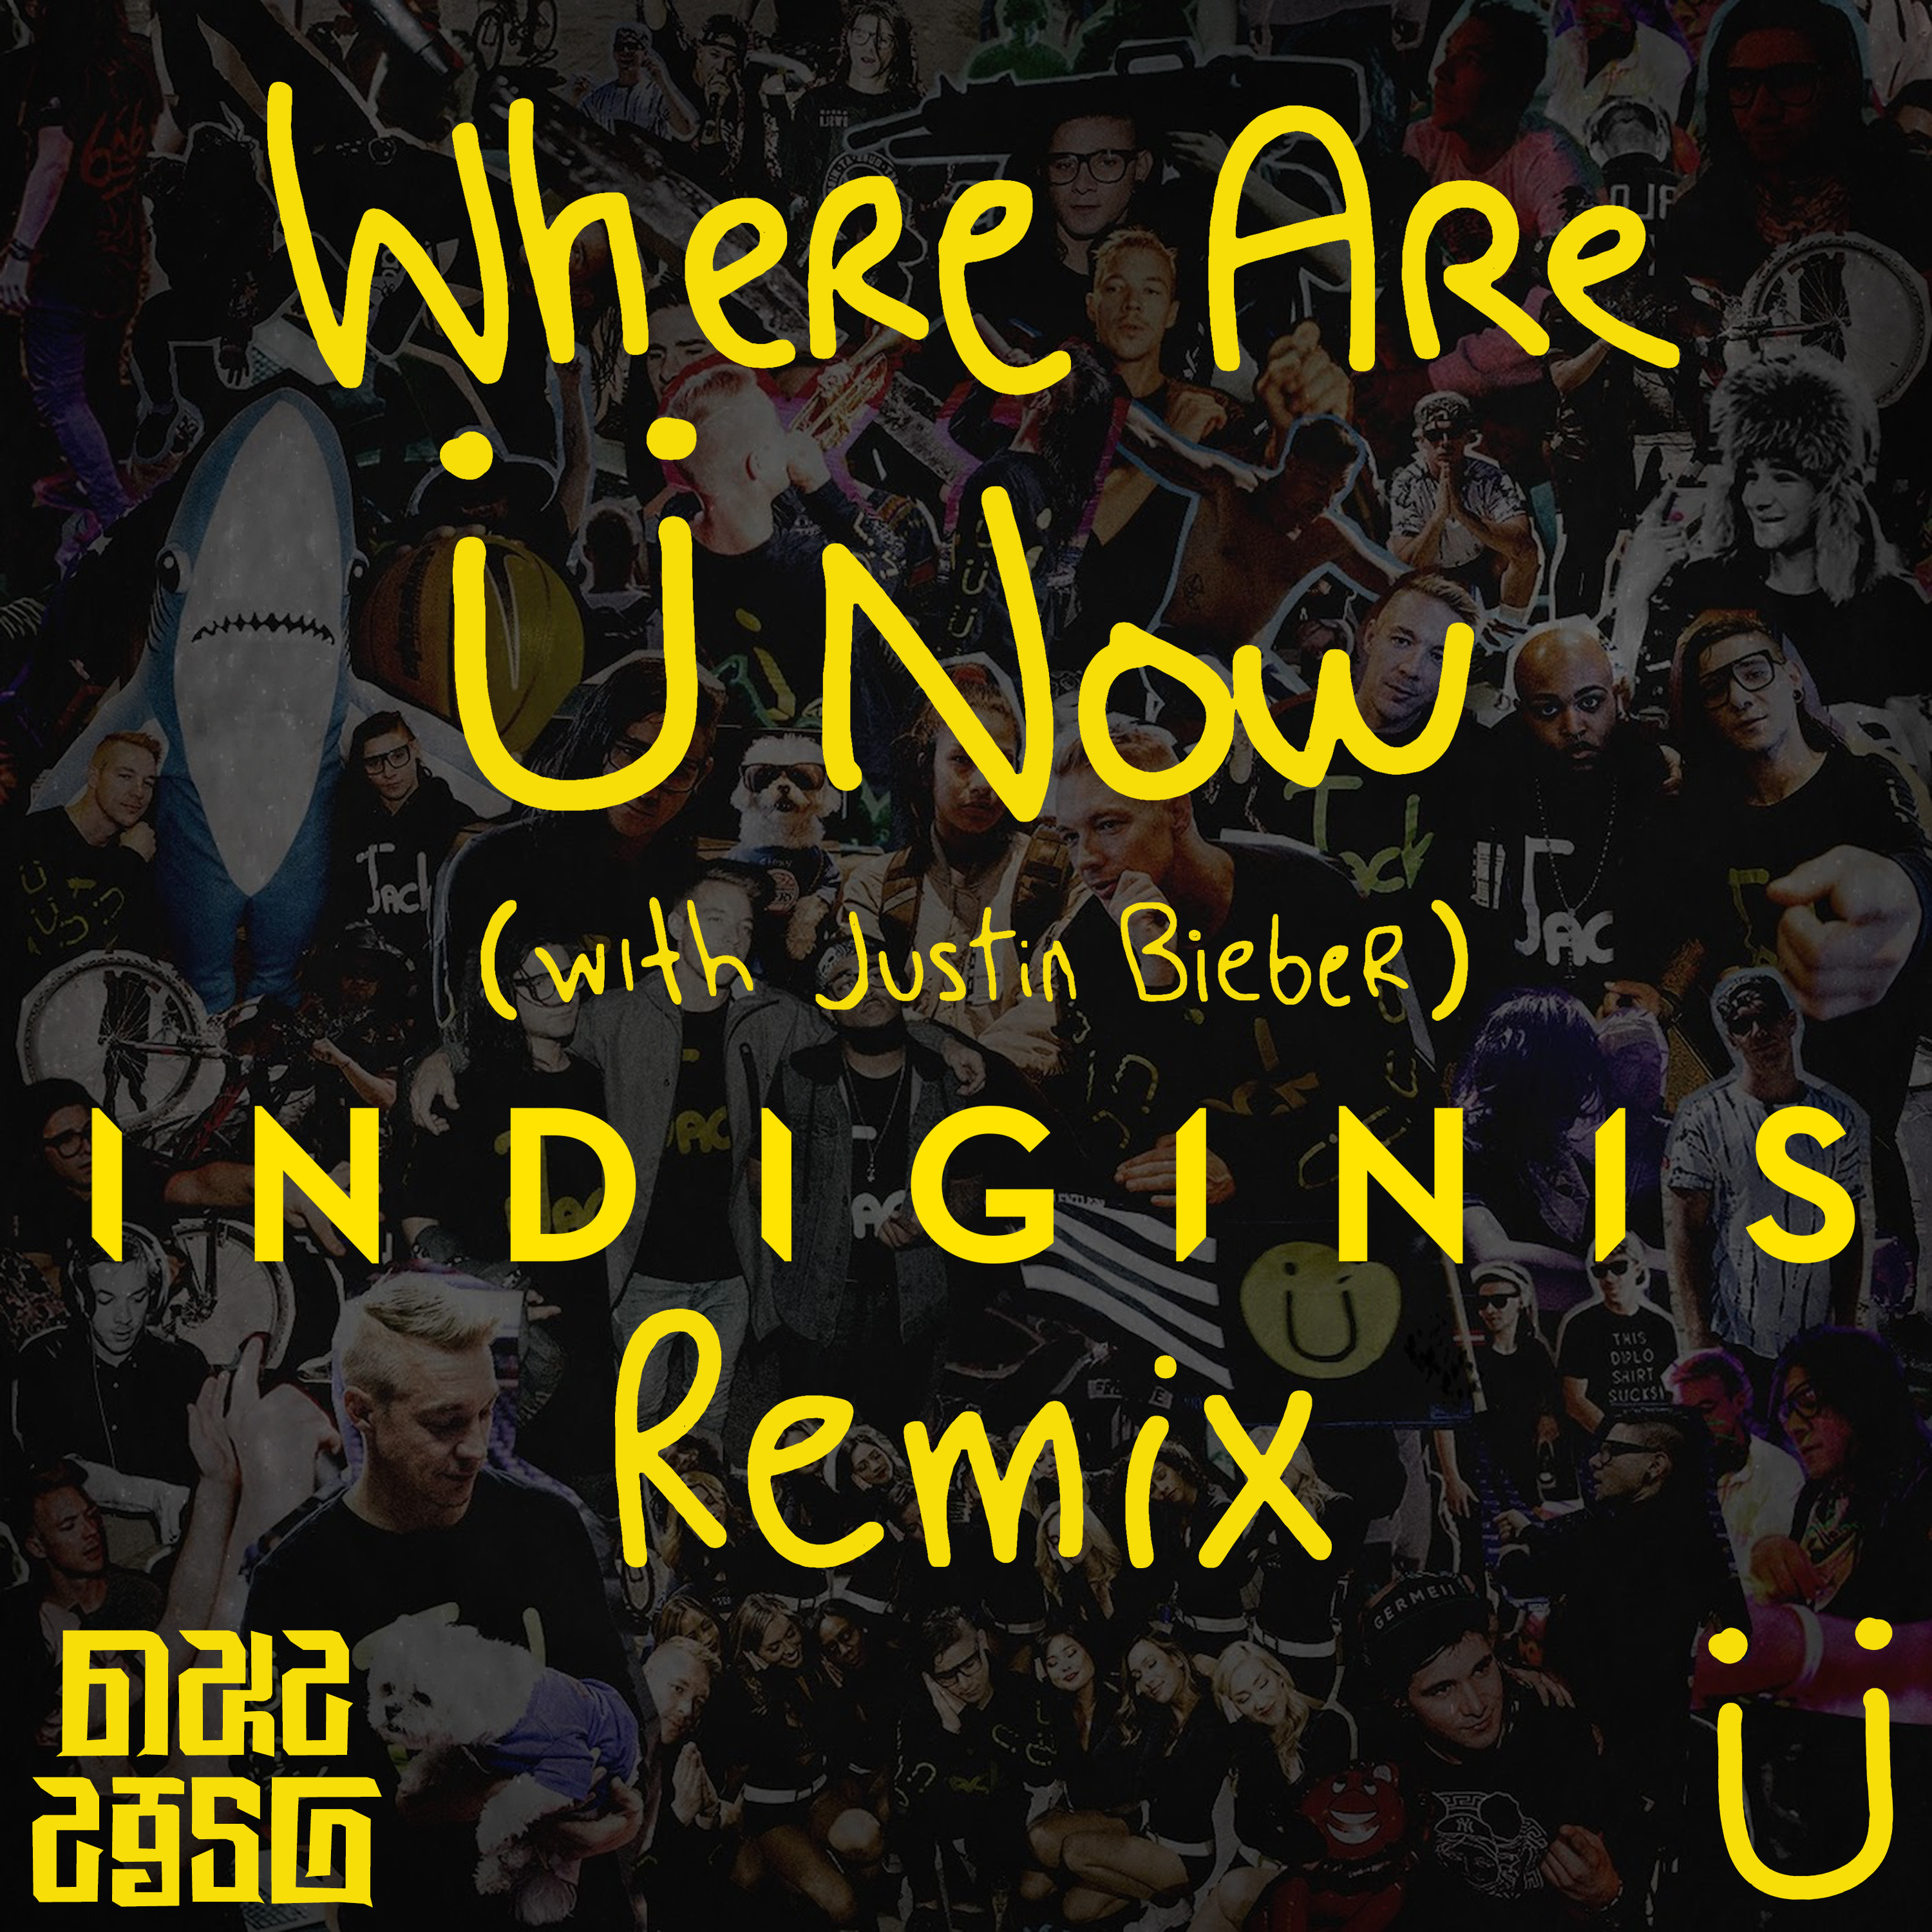 Justin Bieber - Where Are You Now